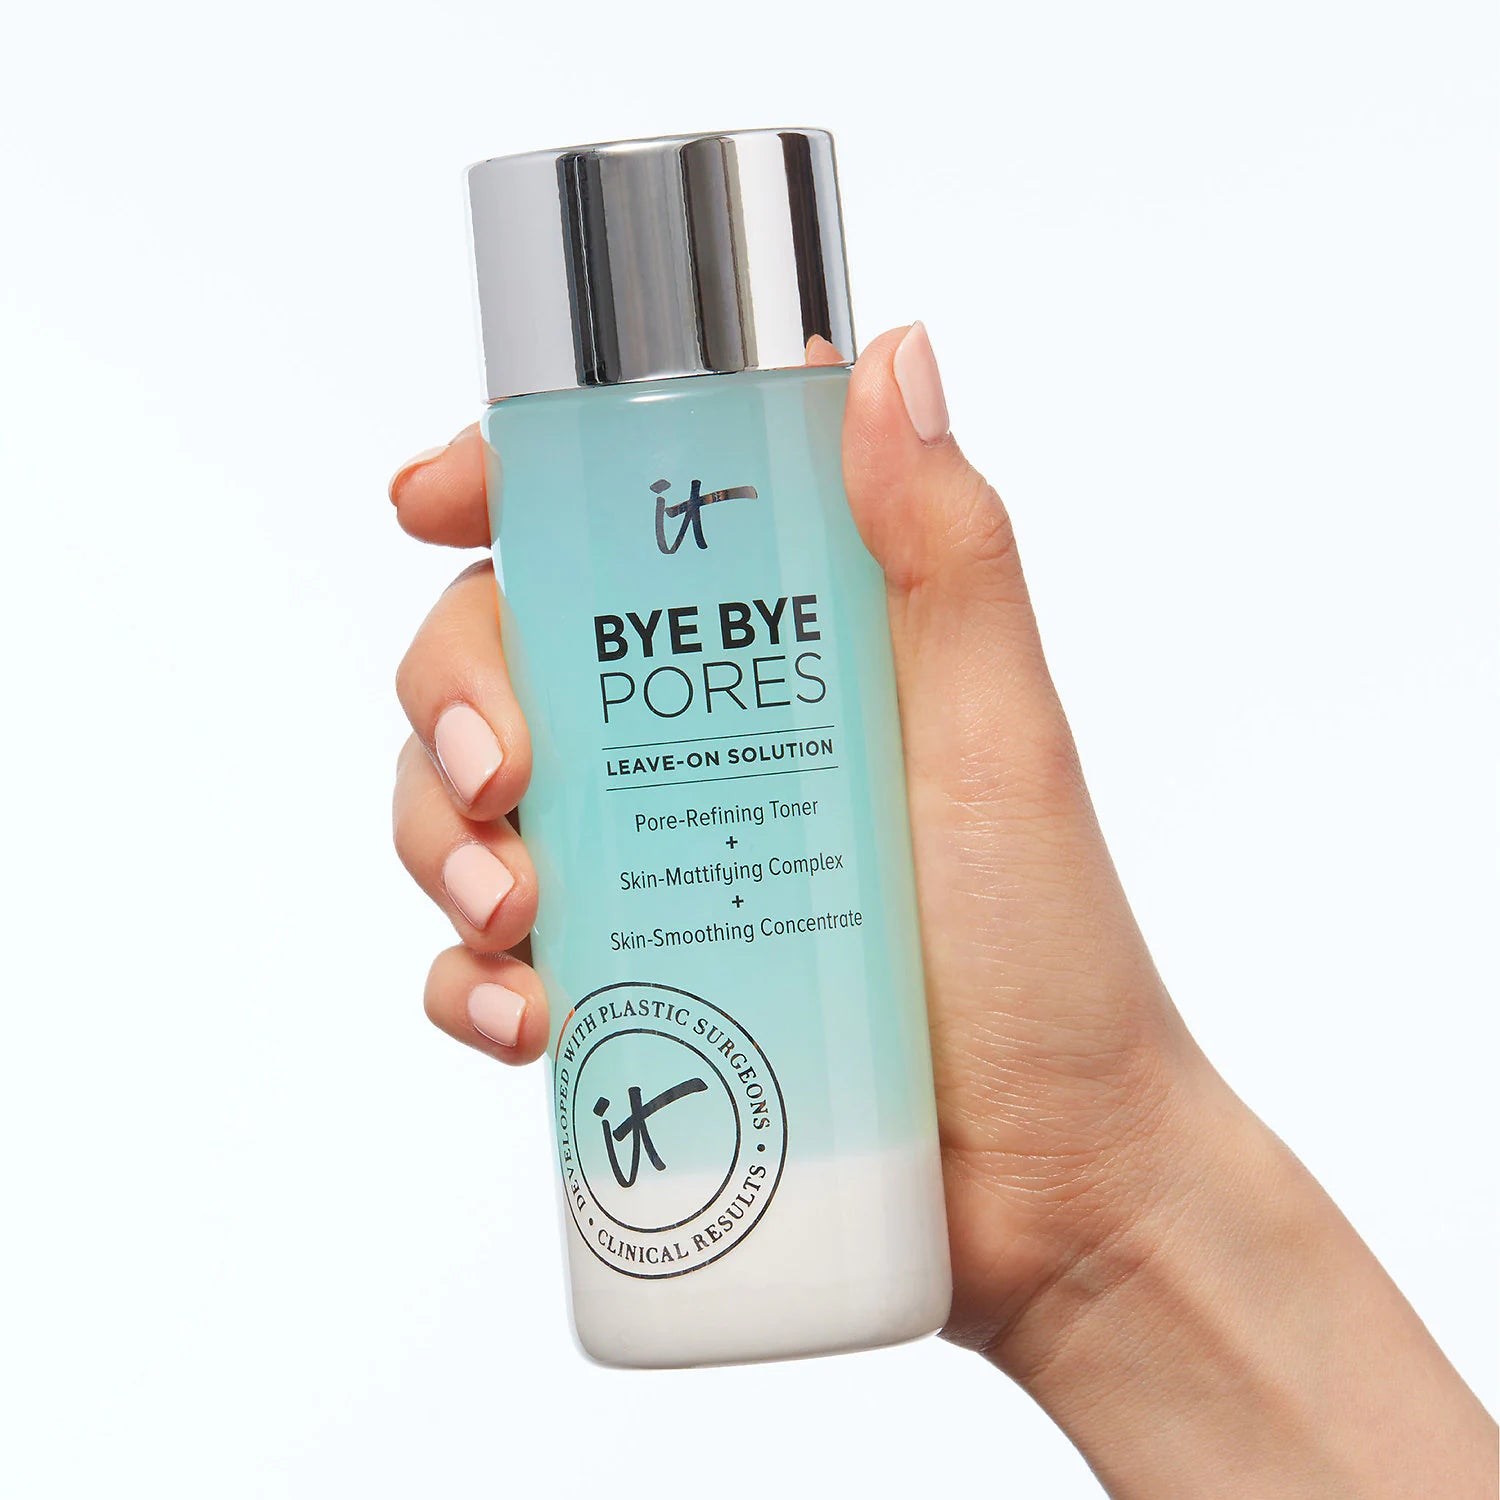 it-cosmetics-bye-bye-pores-leave-on-solution-pore-refining-toner-200ml